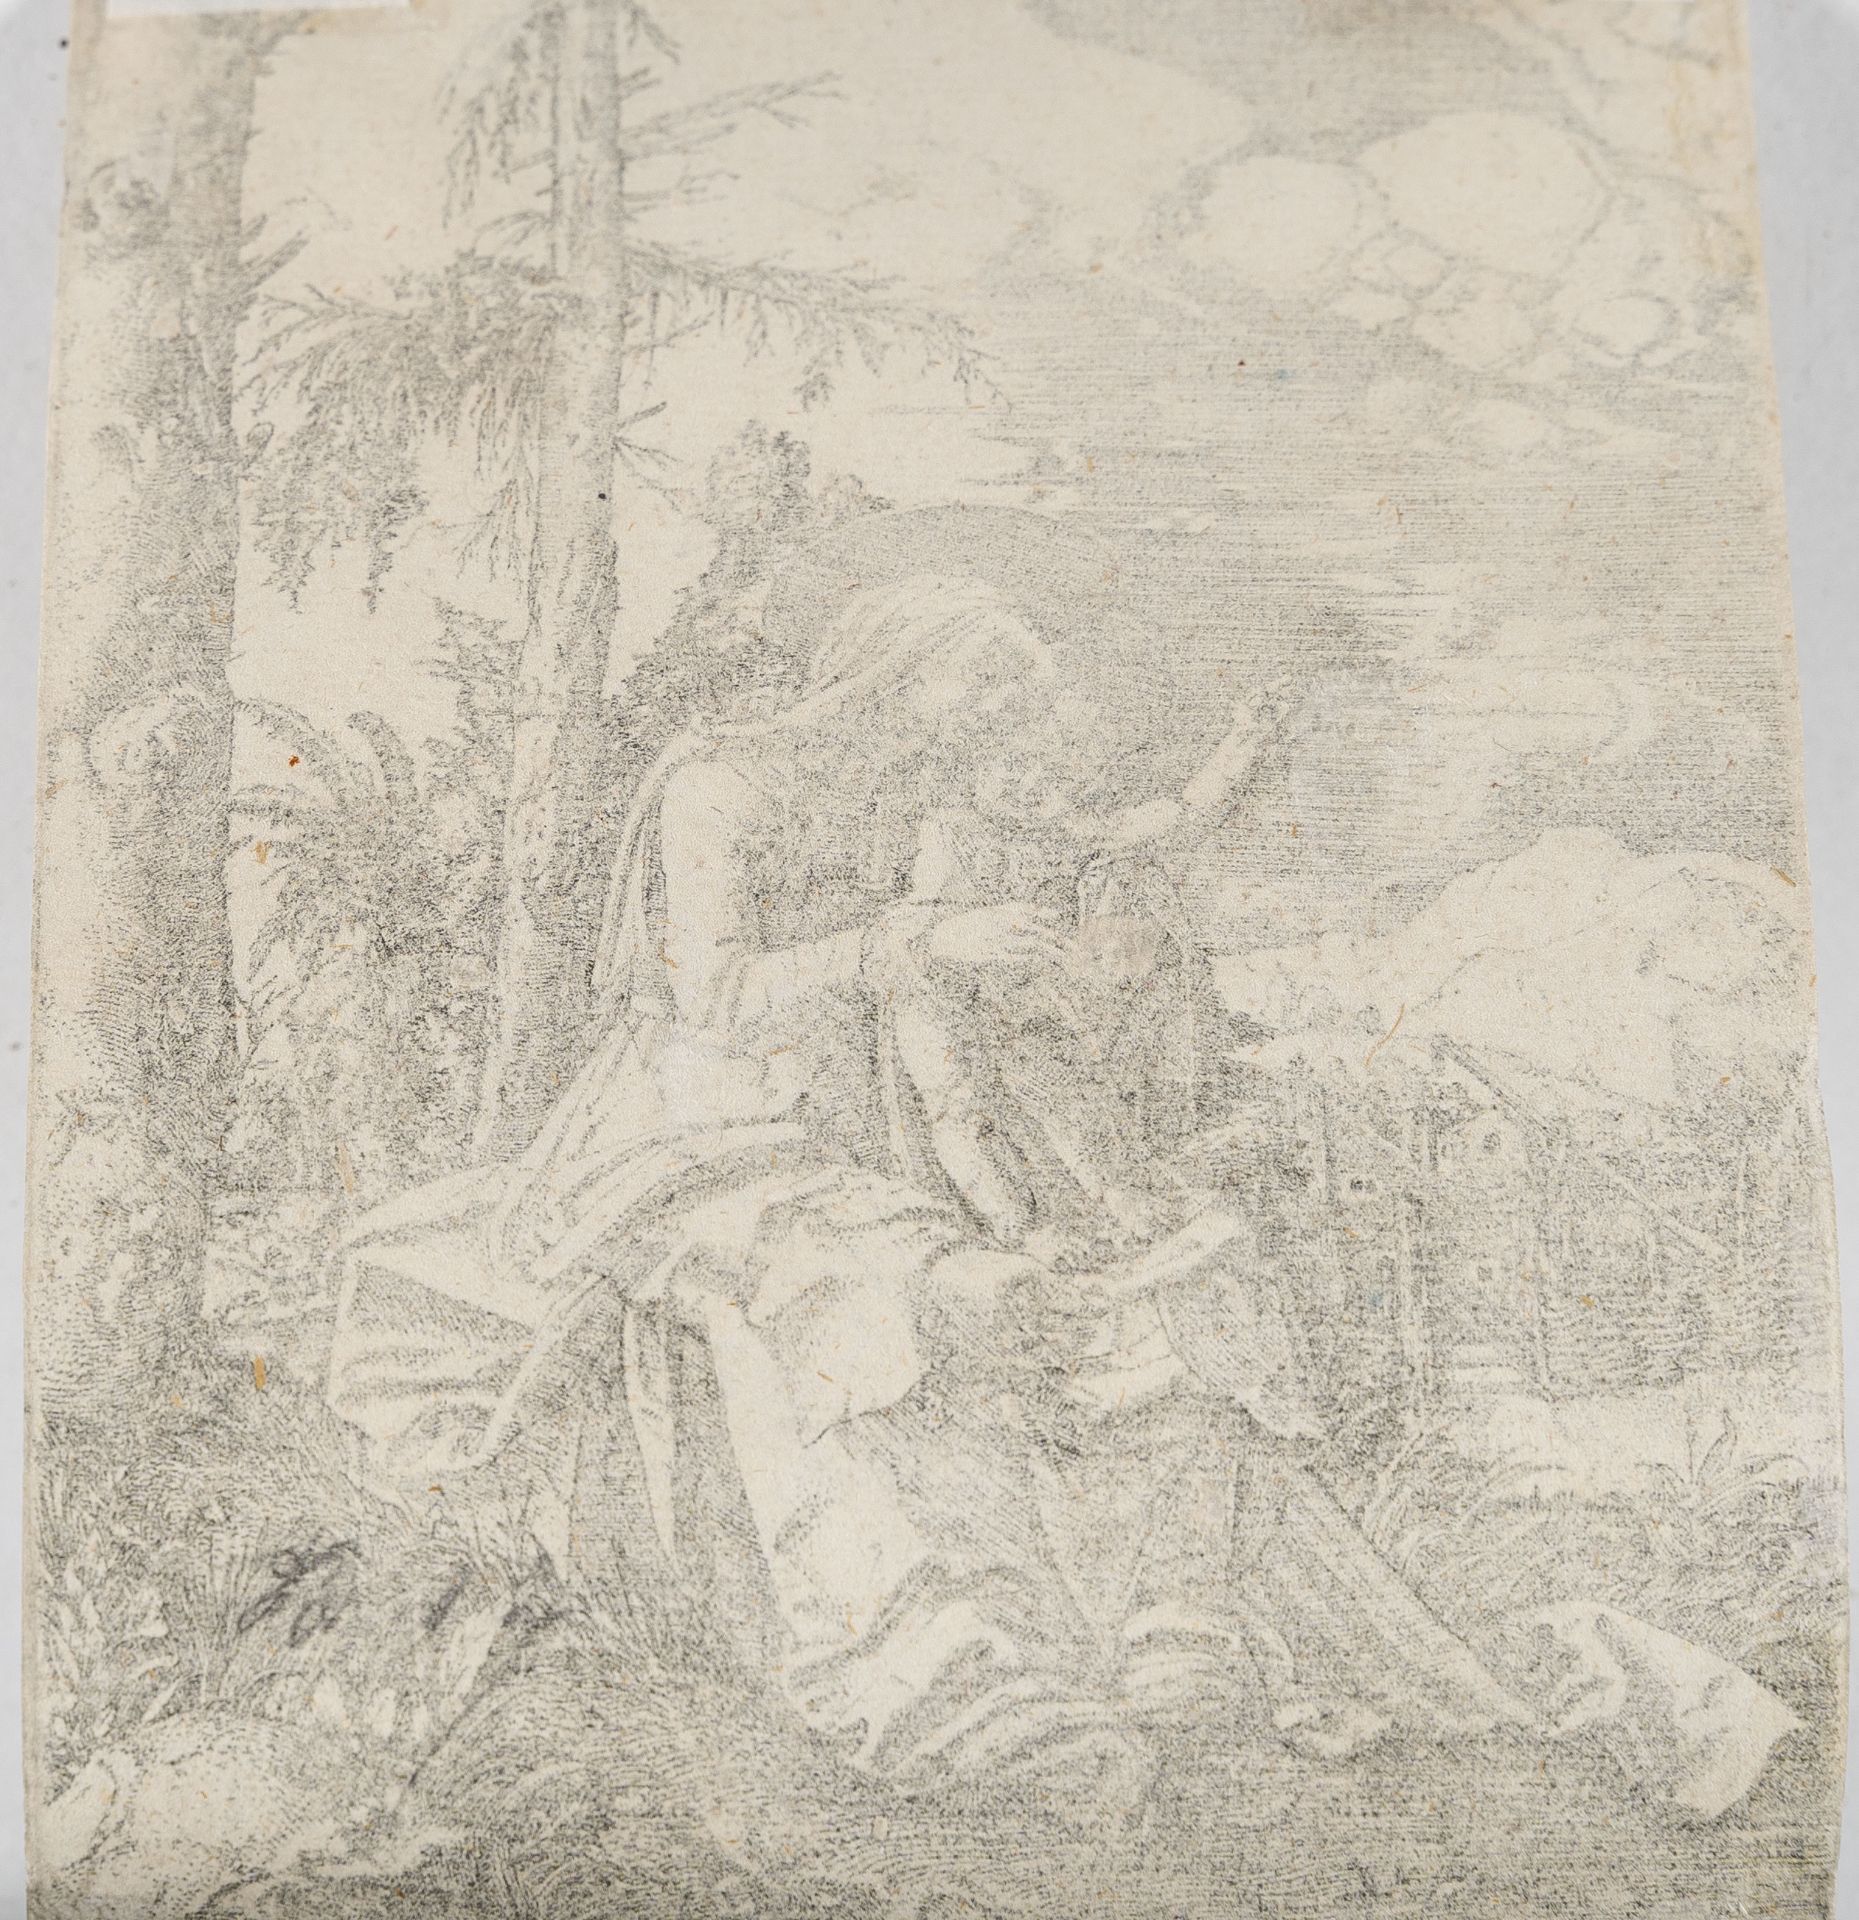 Albrecht Altdorfer, The Virgin with the blessing Christ Child.Engraving on laid paper with watermark - Image 3 of 3